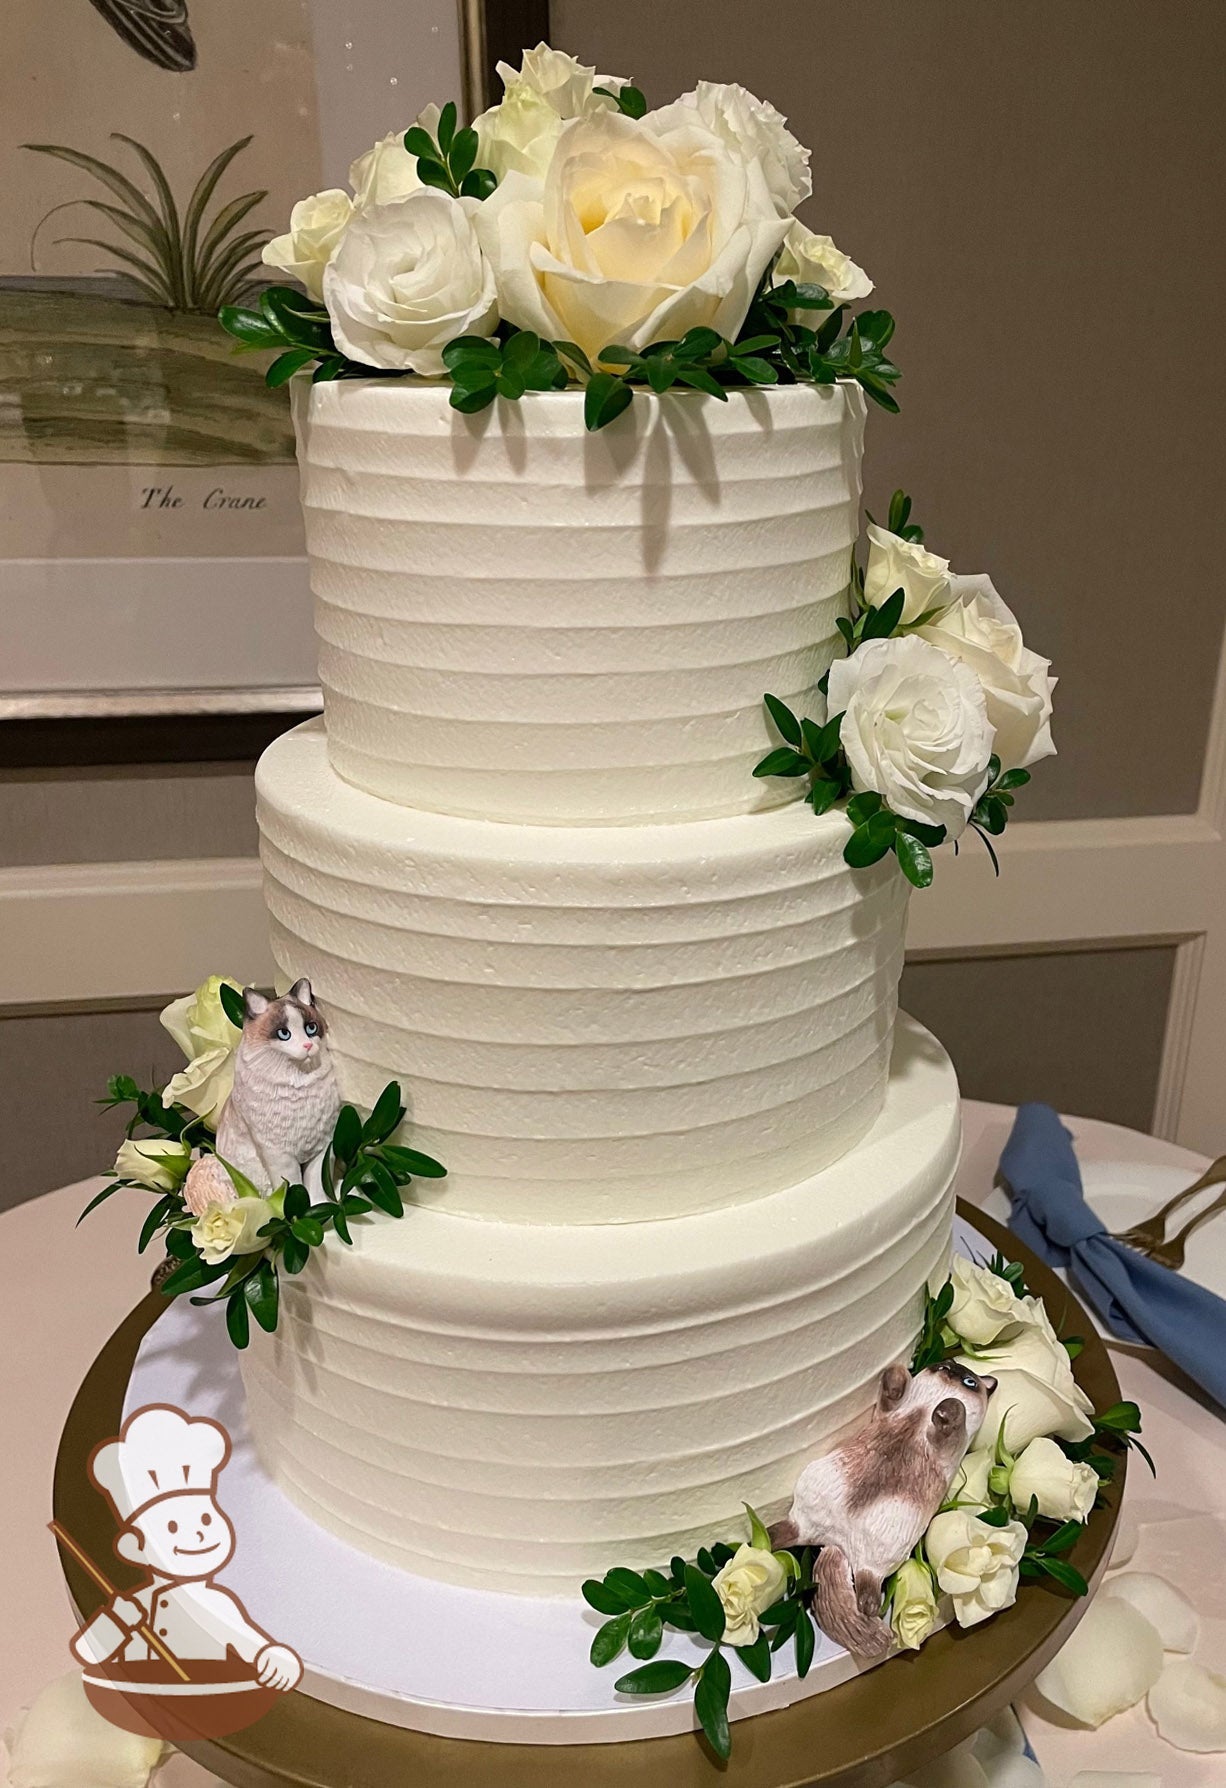 3-tier cake with white icing and decorated with a horizontal texture and fresh flowers in white and cream colors.